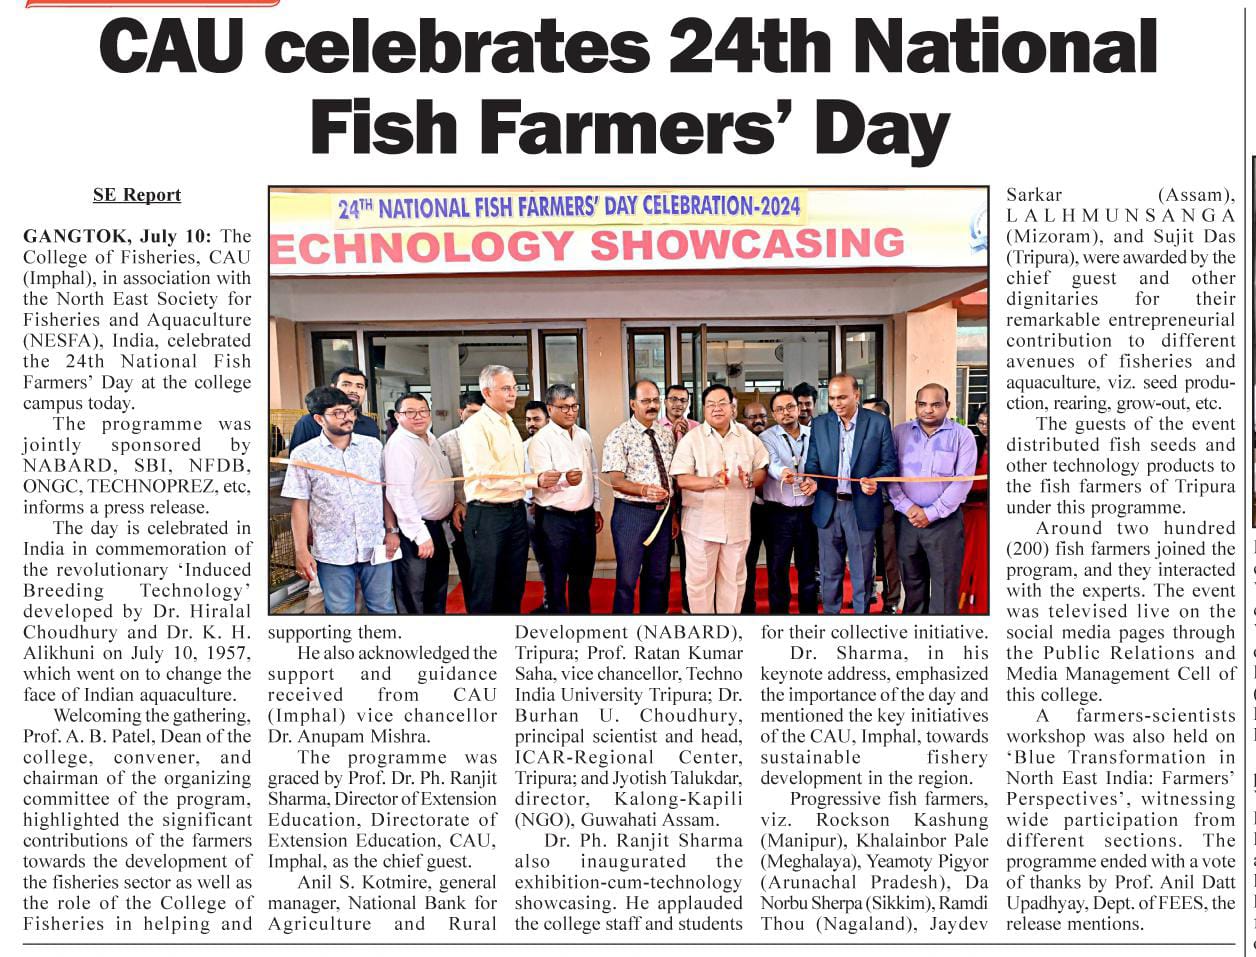 Media Reports on National Fish Farmers’ Day 2024